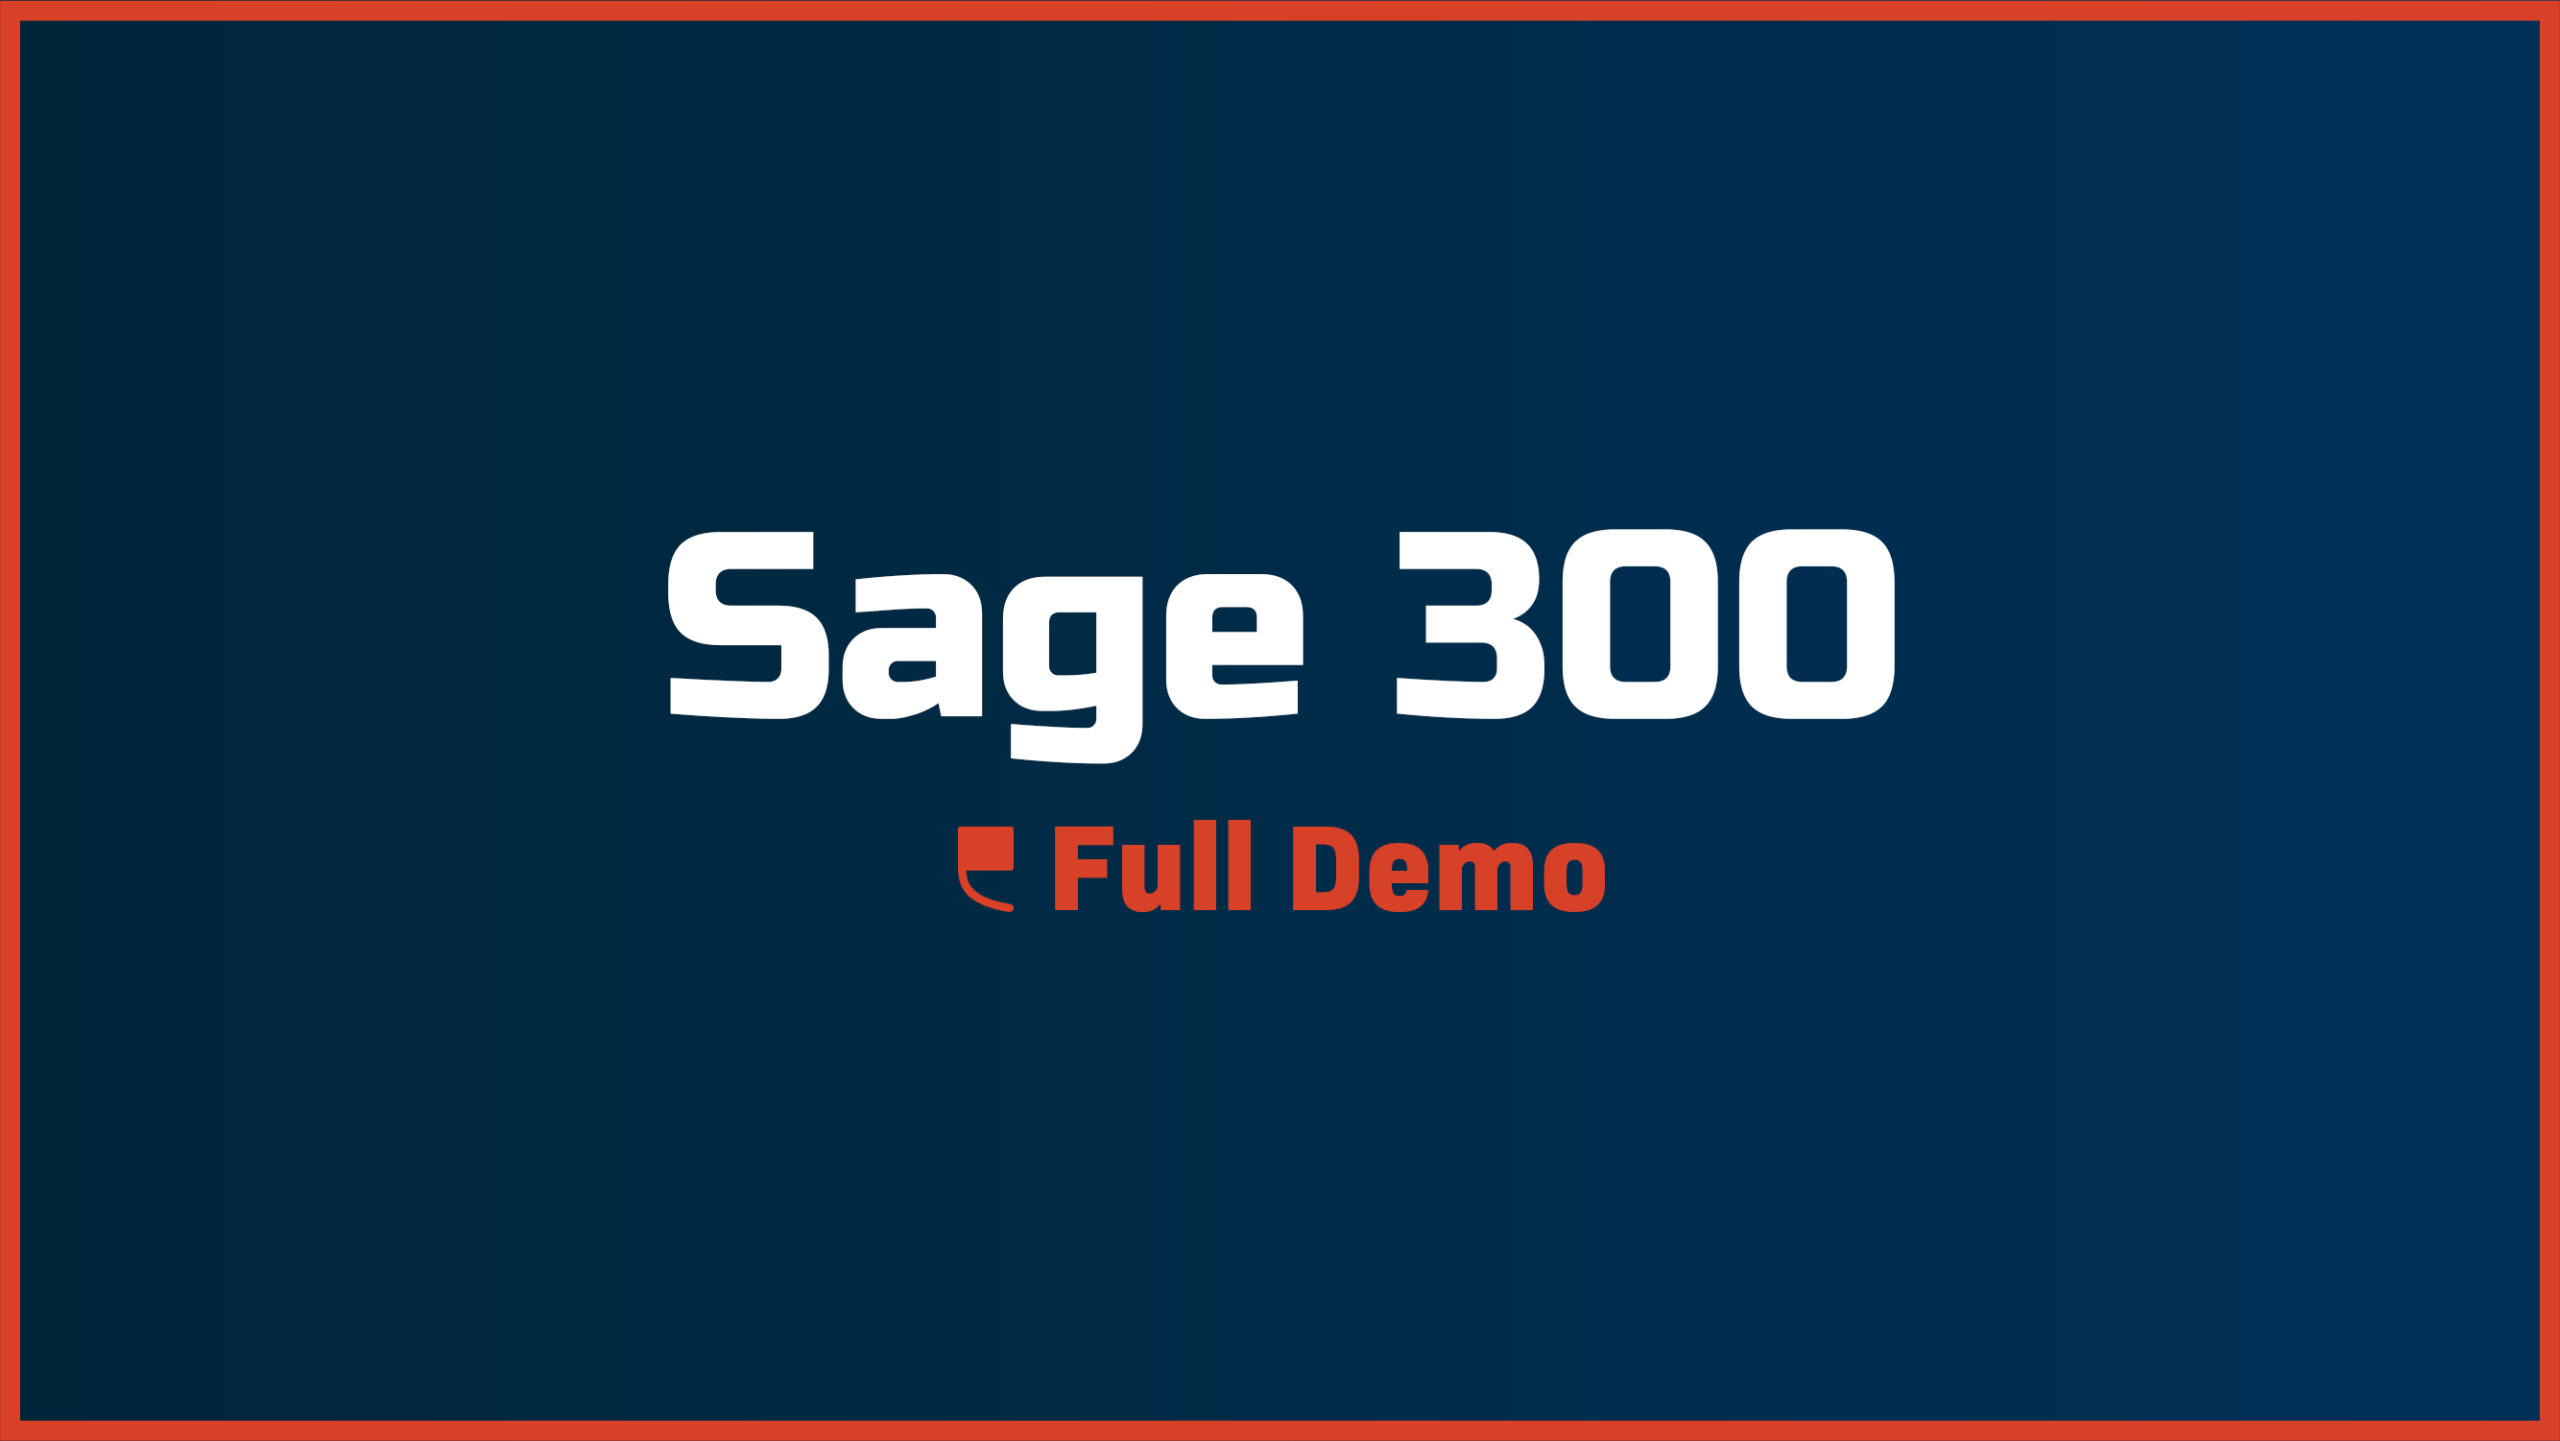 Sage 300 – Full Demo - Featured Image